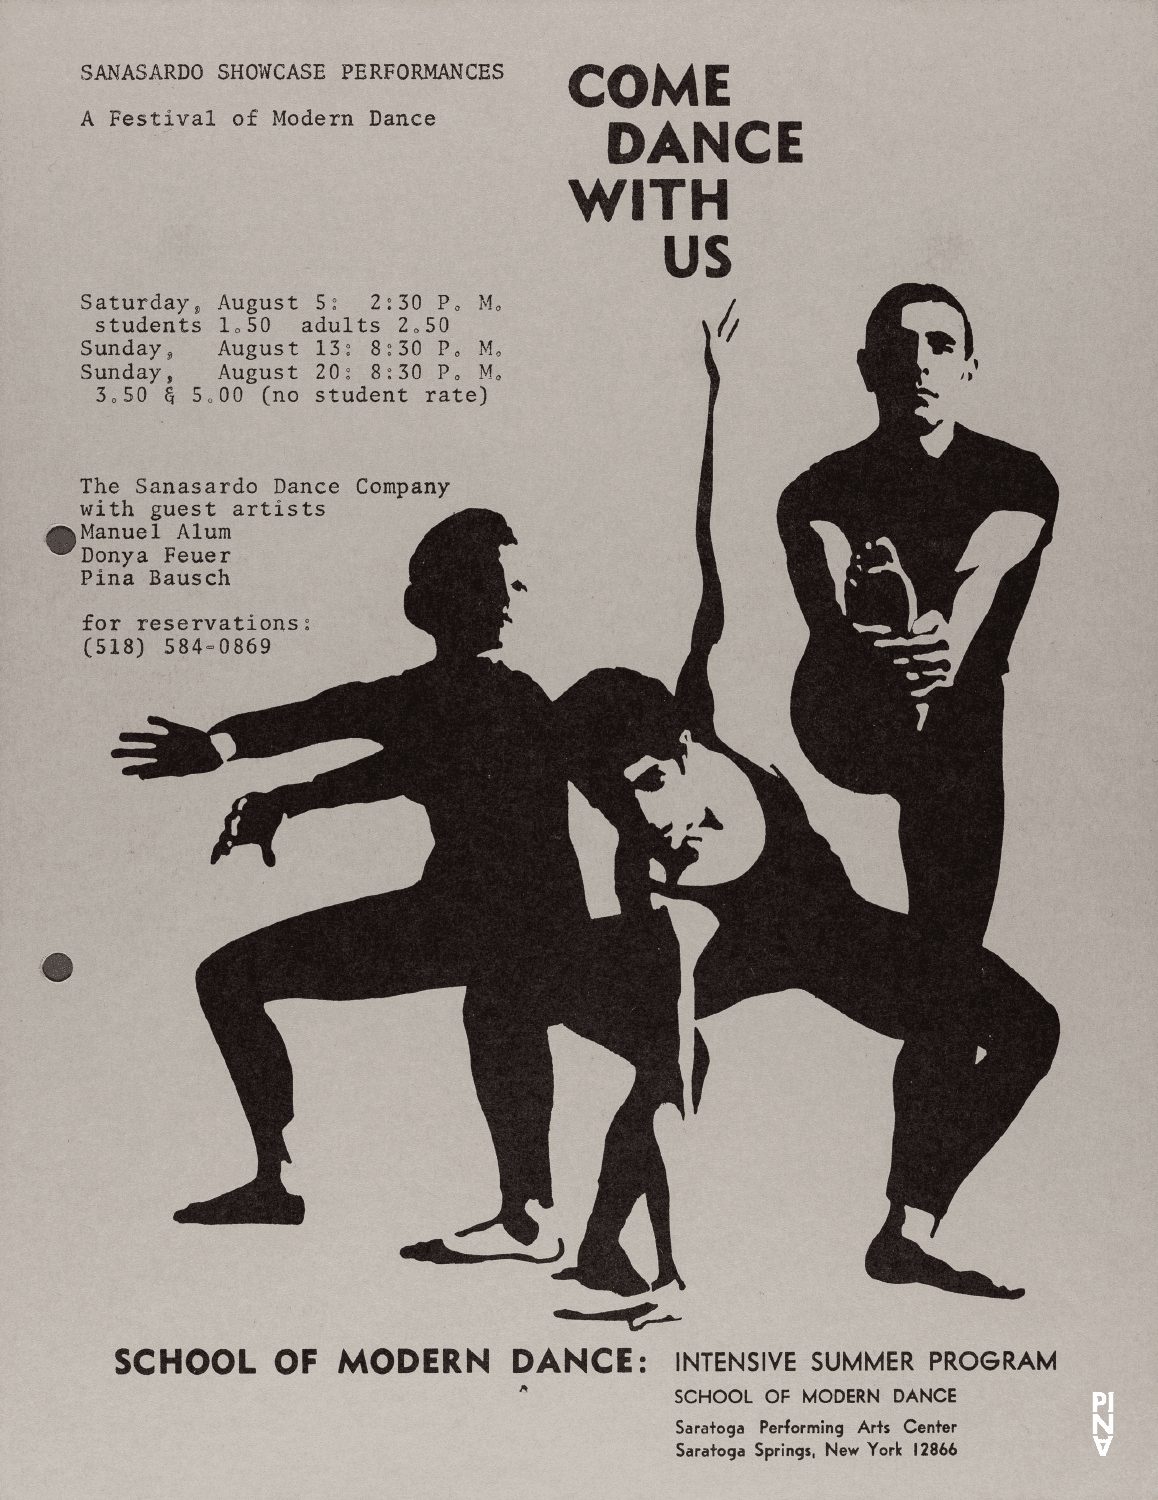 Foldable leaflet for “Nachnull (After Zero)” and “PHILIPS 836 887 DSY” by Pina Bausch with The Sanasardo Dance Company in in New York and Saratoga, NY, 08/05/1972 – 08/20/1972